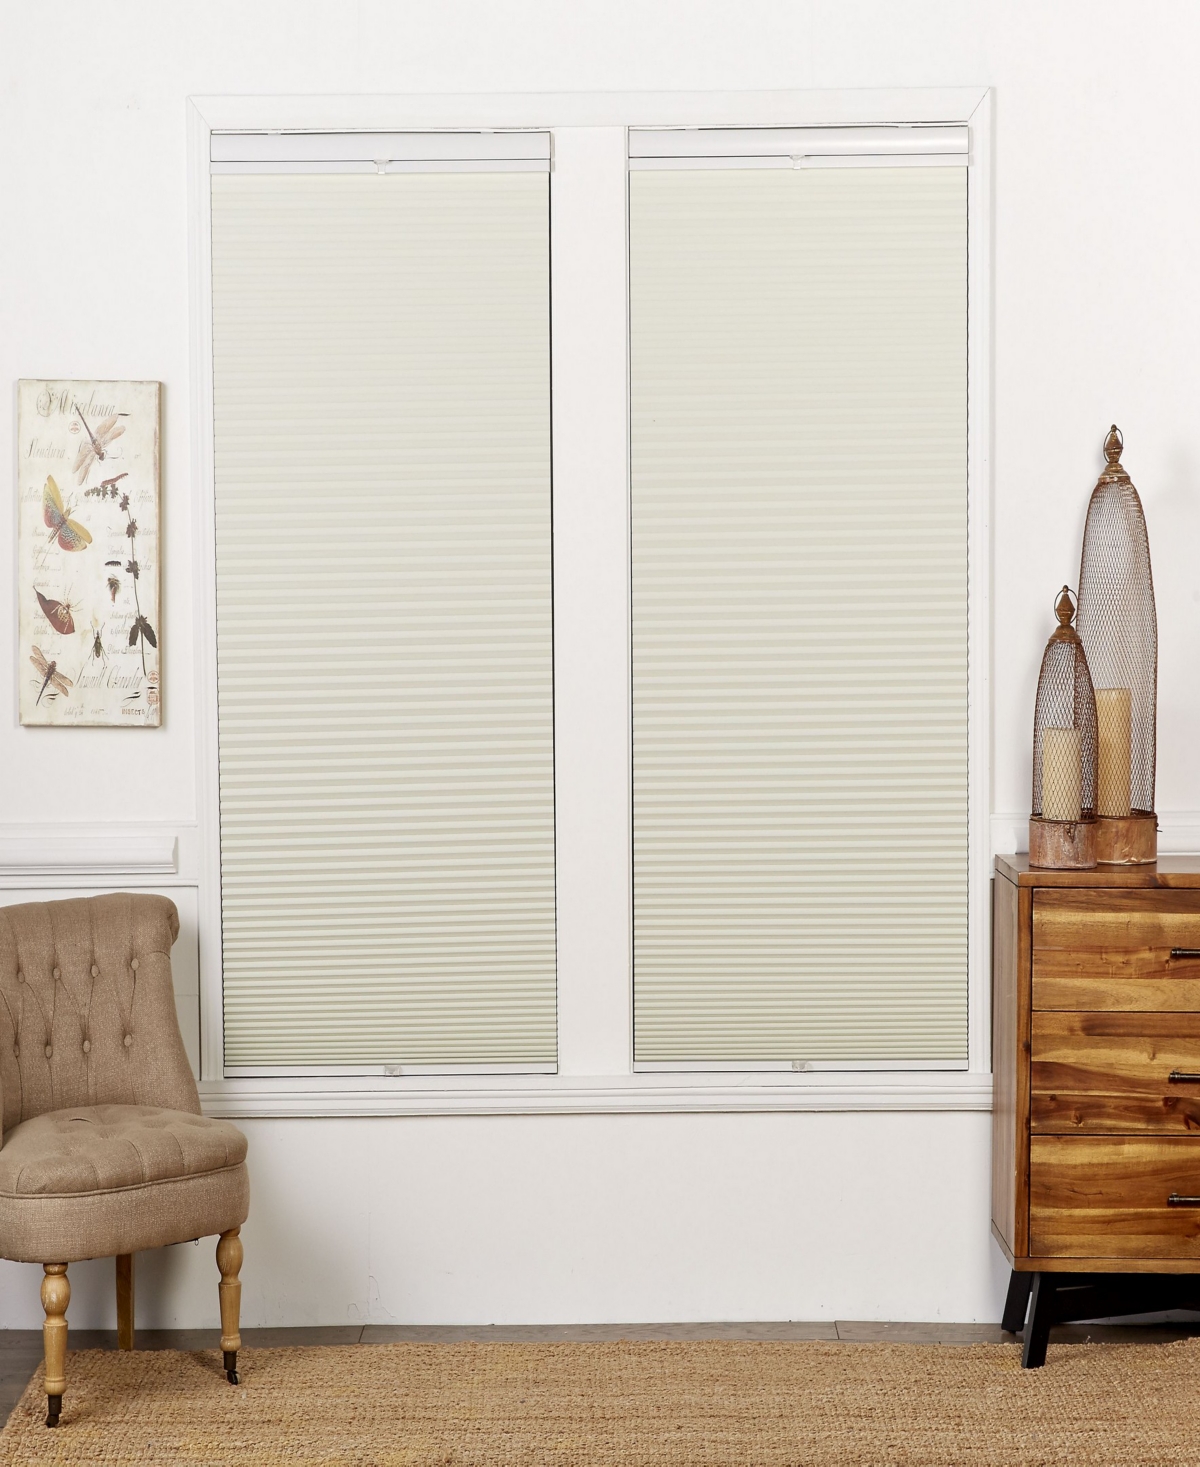 The Cordless Collection Cordless Blackout Cellular Shade, 32.5" X 72" In Latte-whit